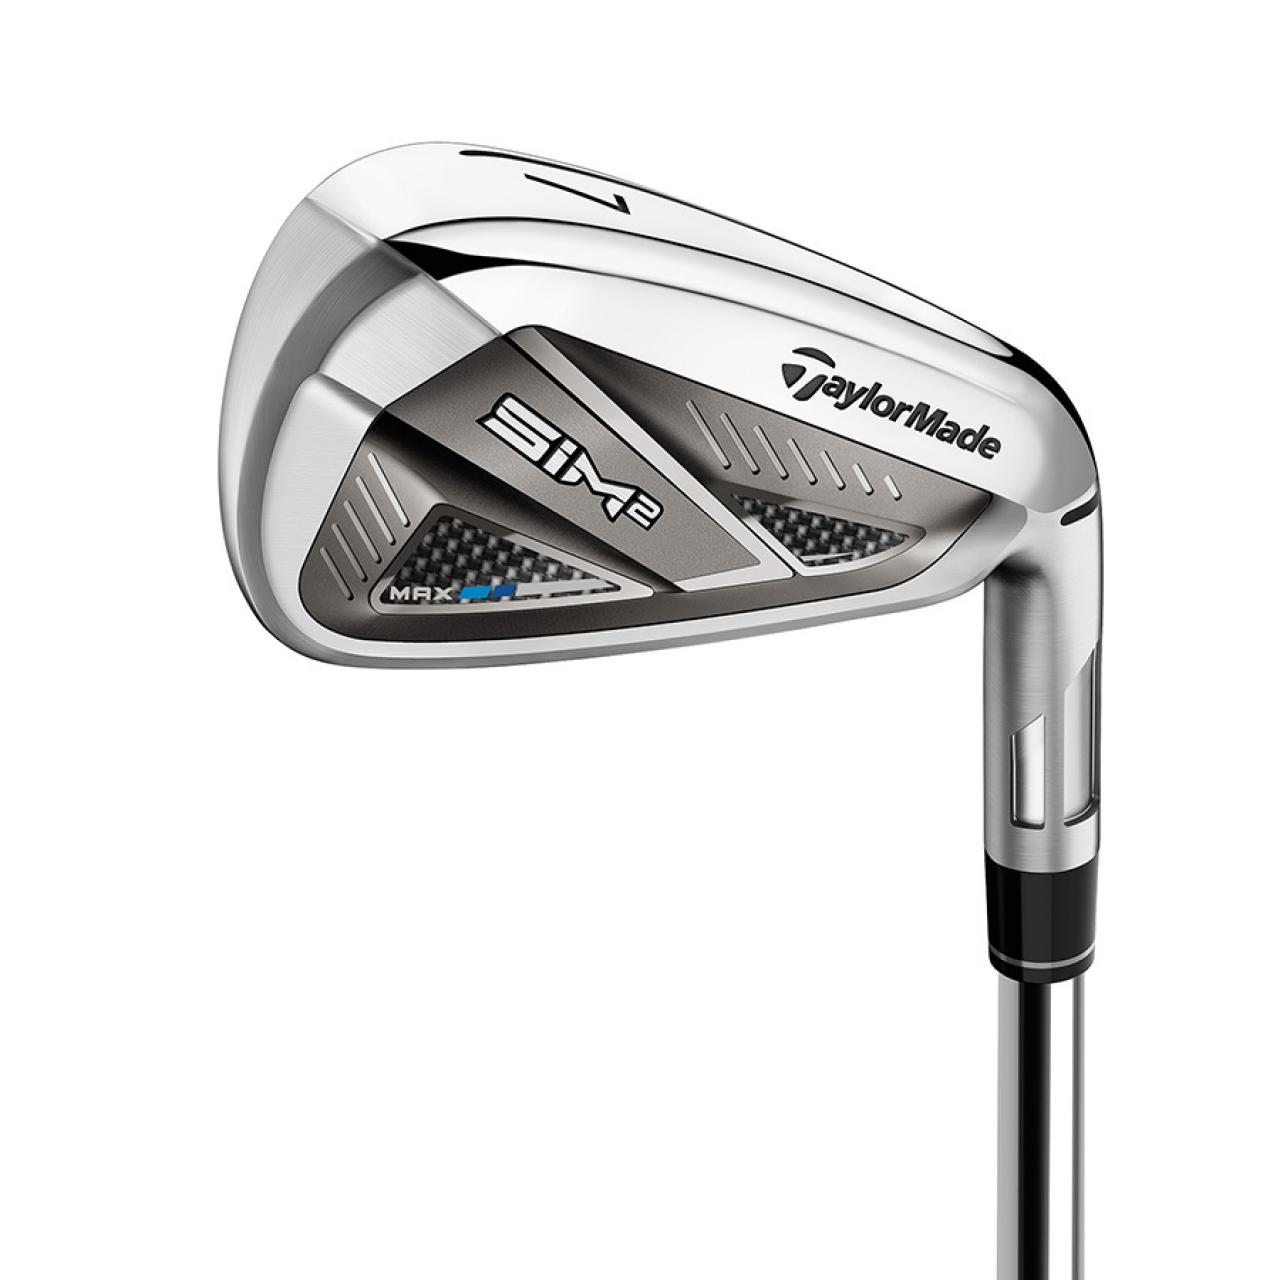 TaylorMade's SIM2 Max and Max OS irons have “advantages a cavity 